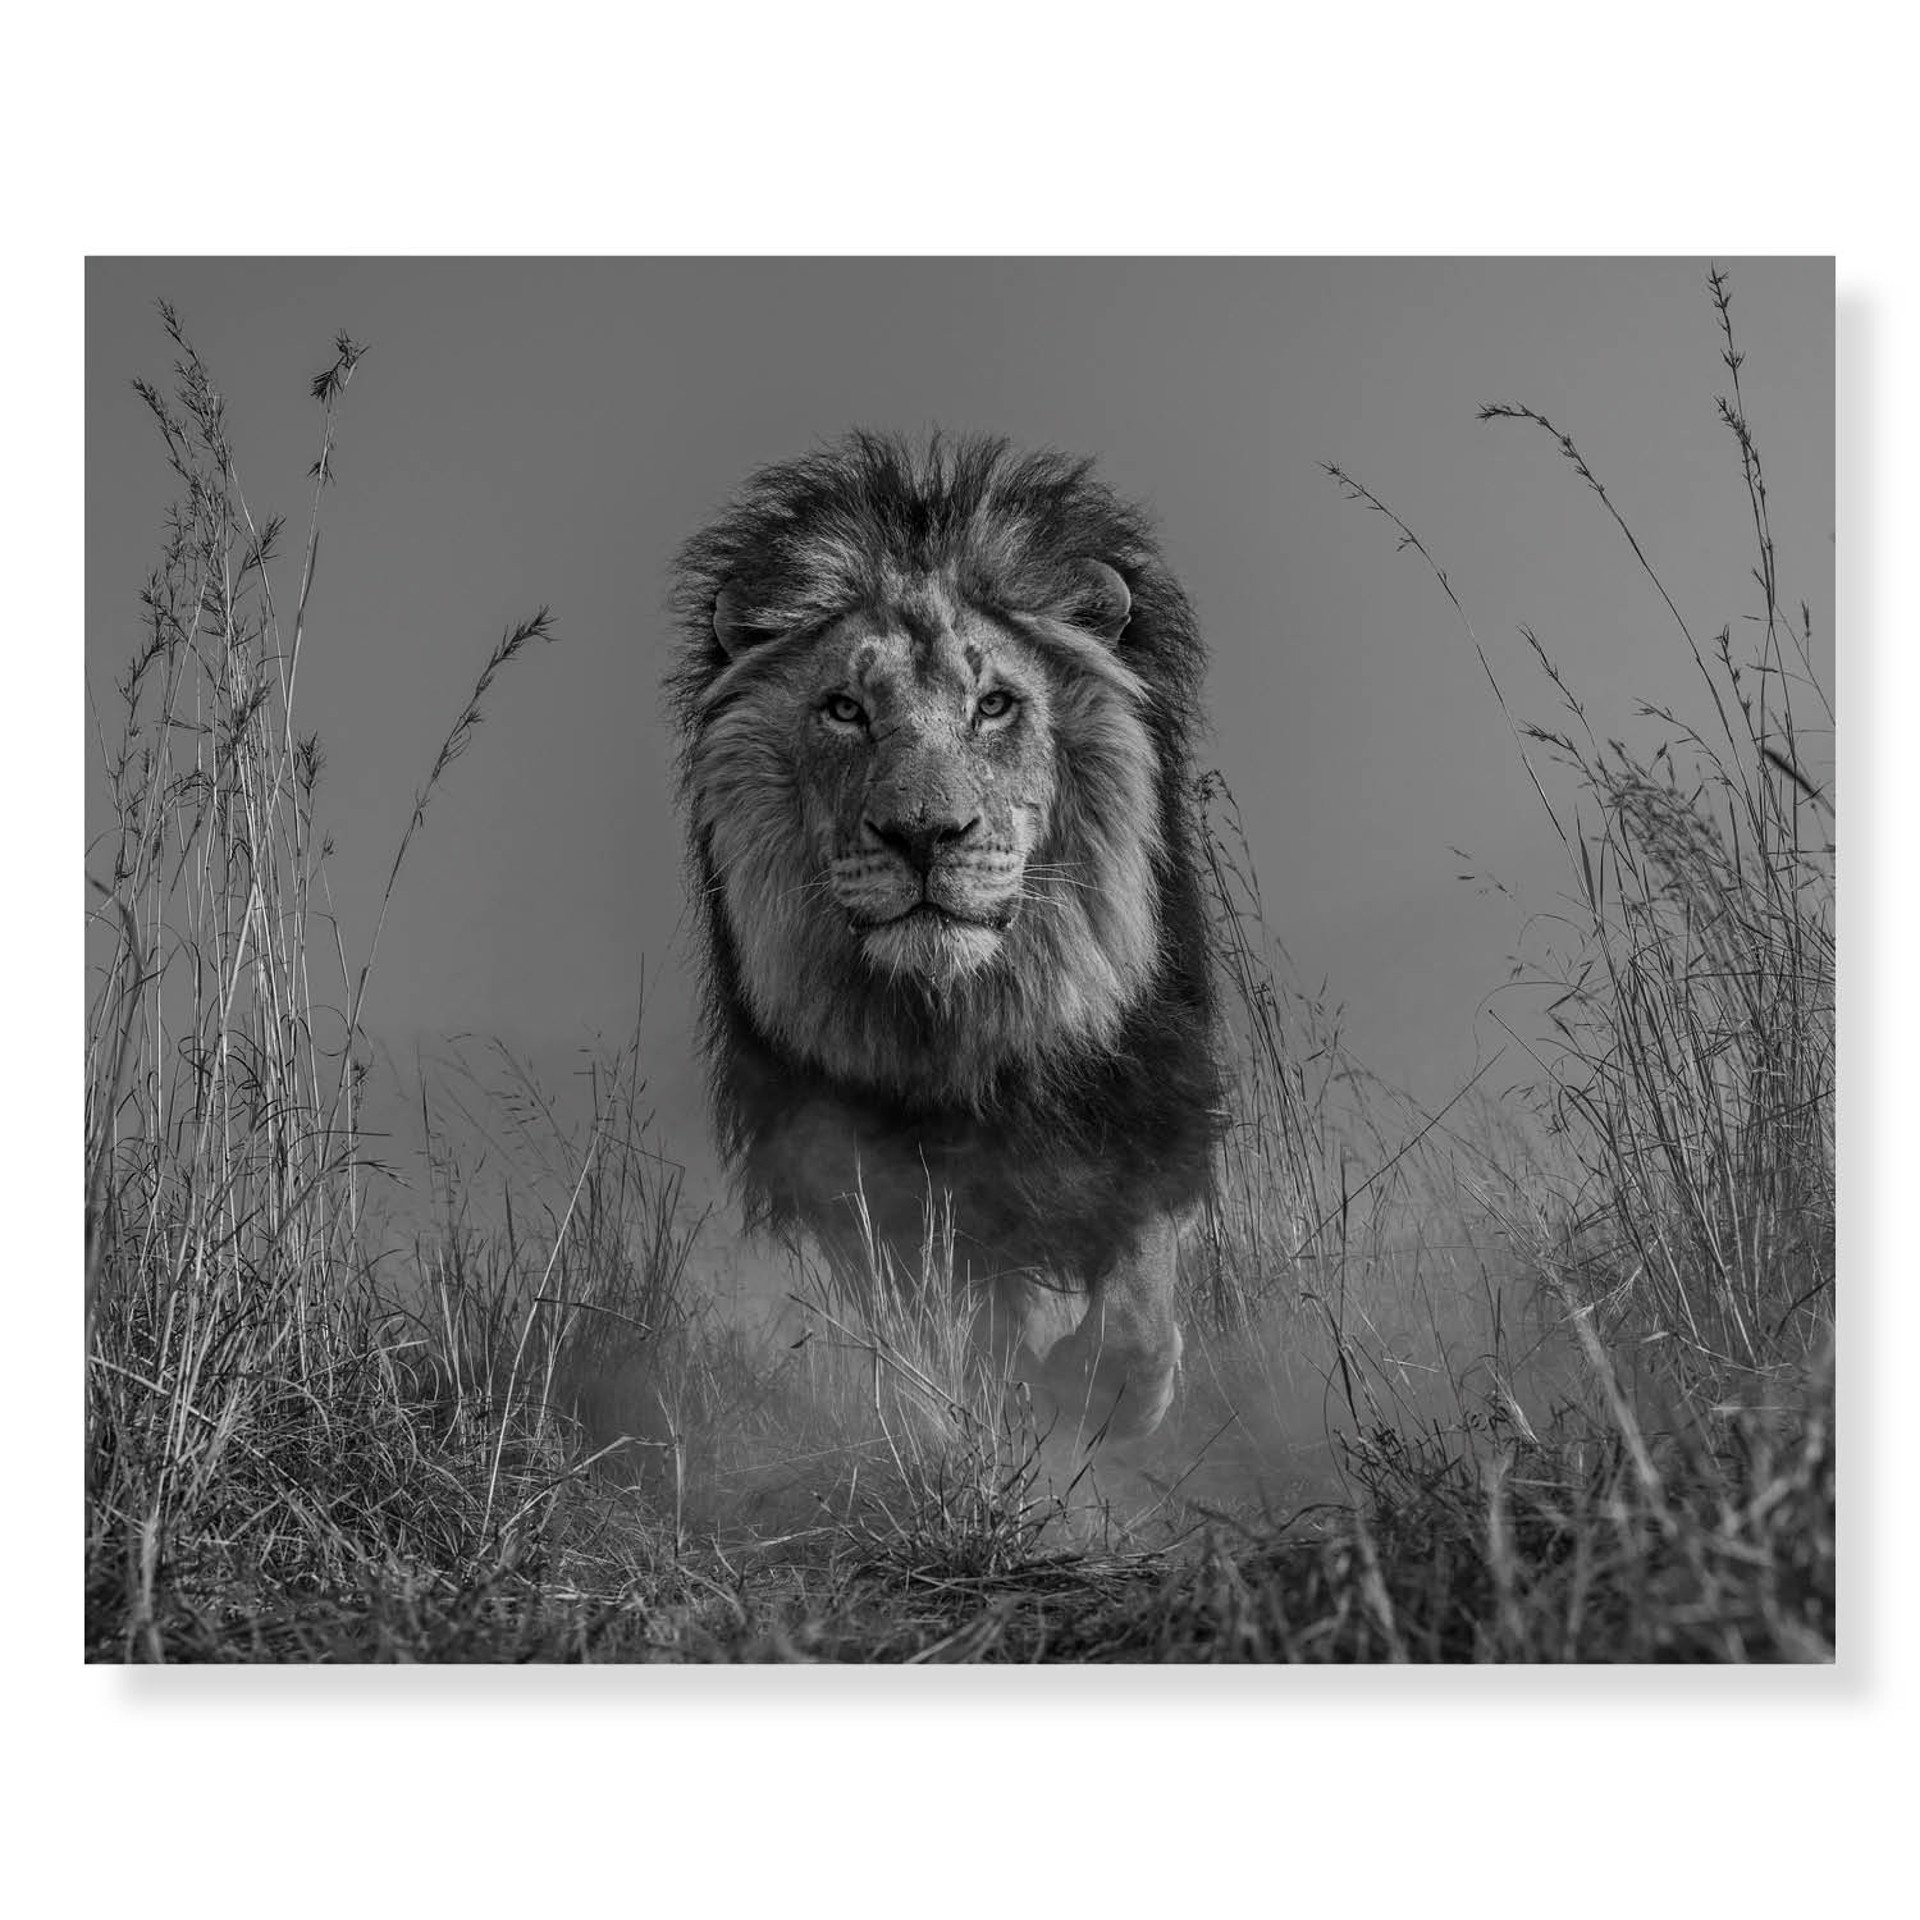 The King and I by David Yarrow